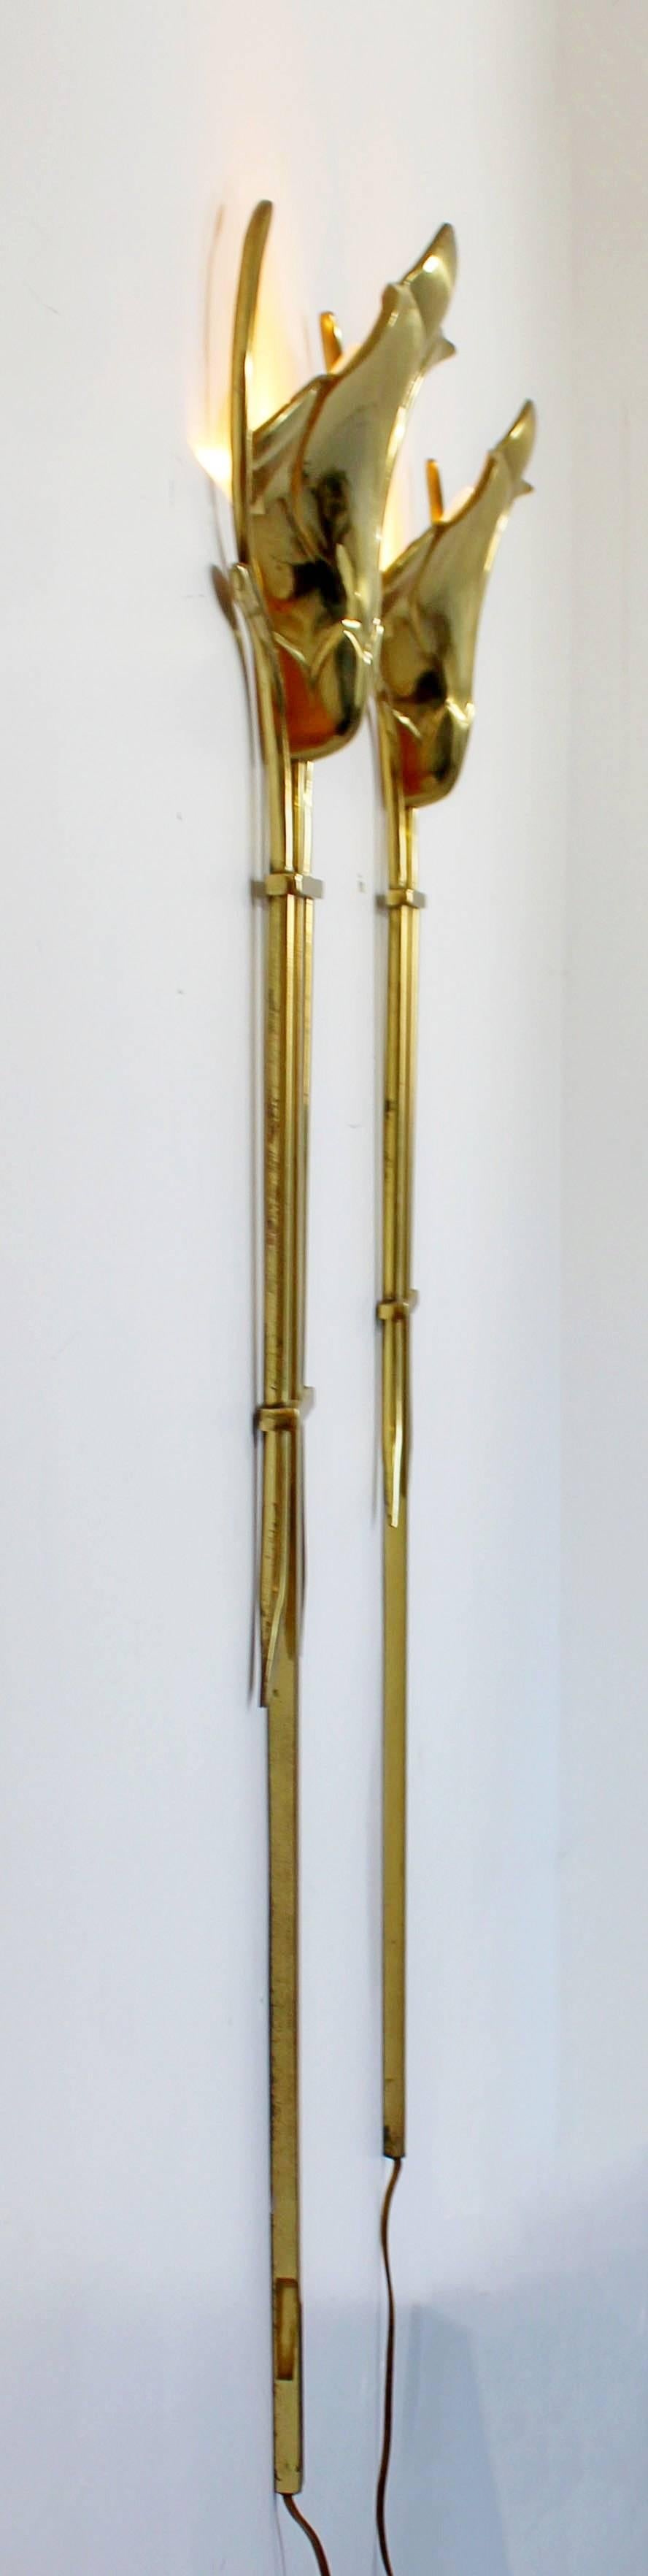 American Mid-Century Modern Frederick Cooper Pair of Hanging Brass Wall Sconces, 1960s